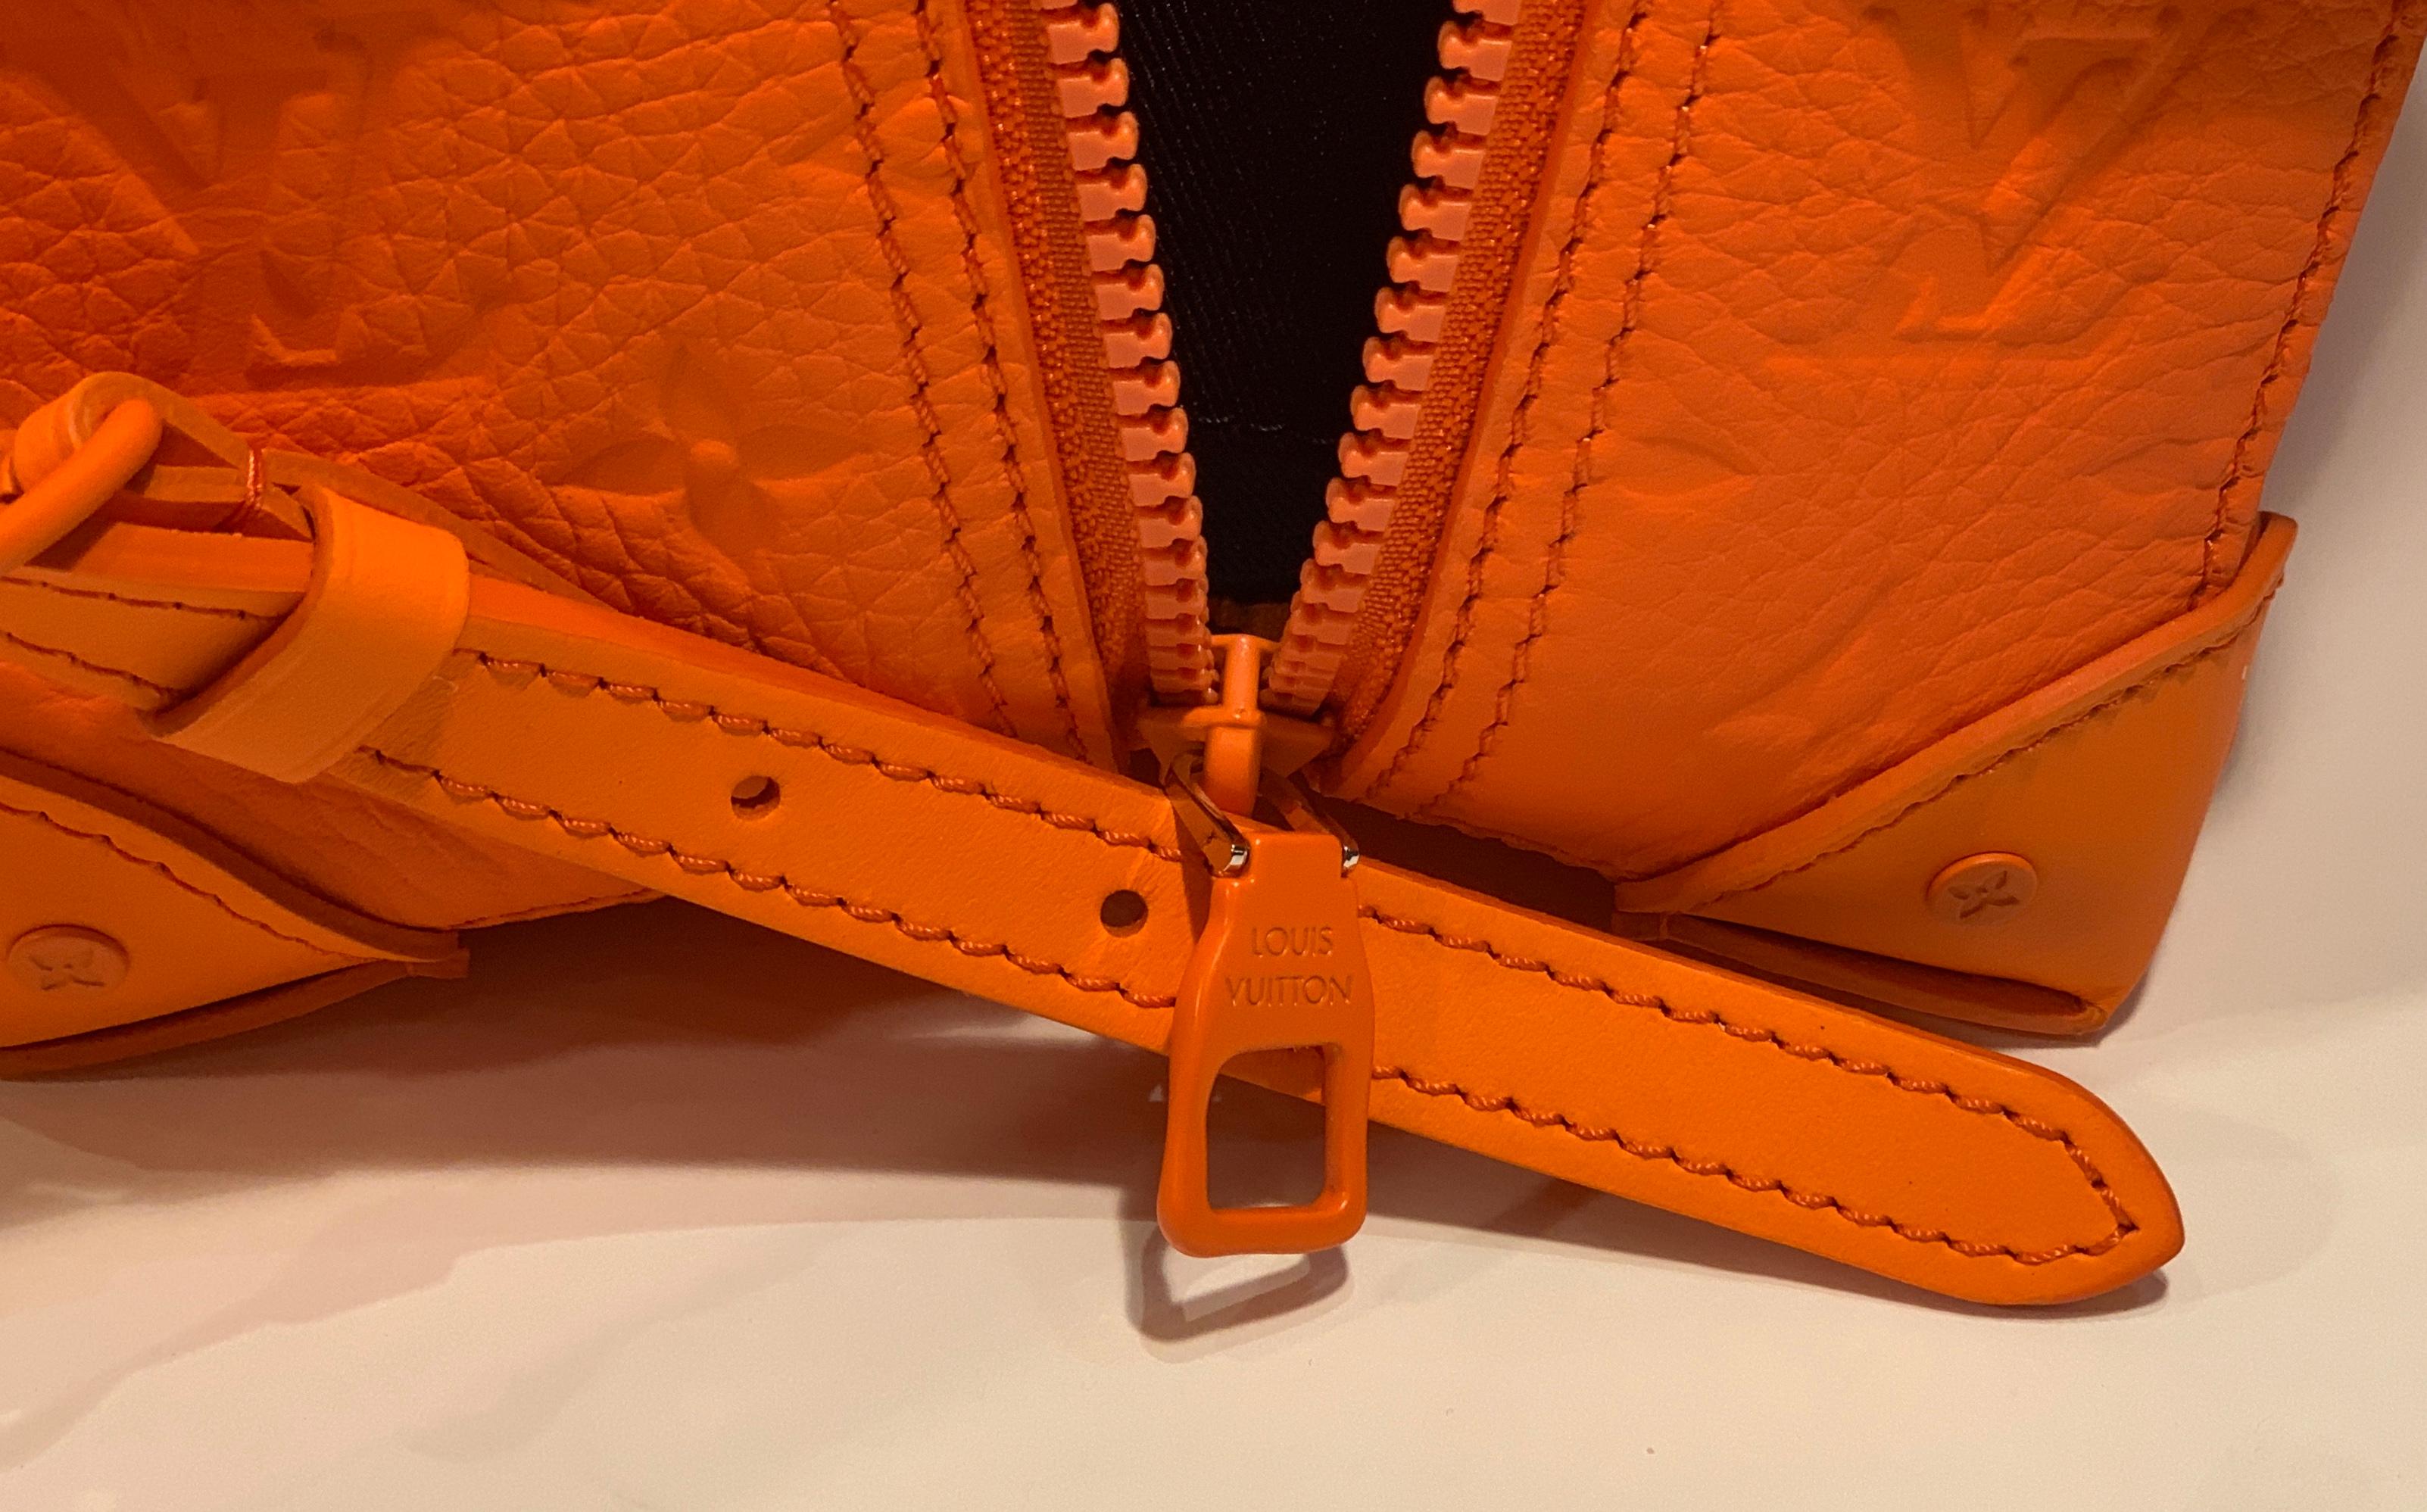 SOLD OUT Louis Vuitton Virgil Abloh Figures of Speech Orange Soft Trunk Backpack 7